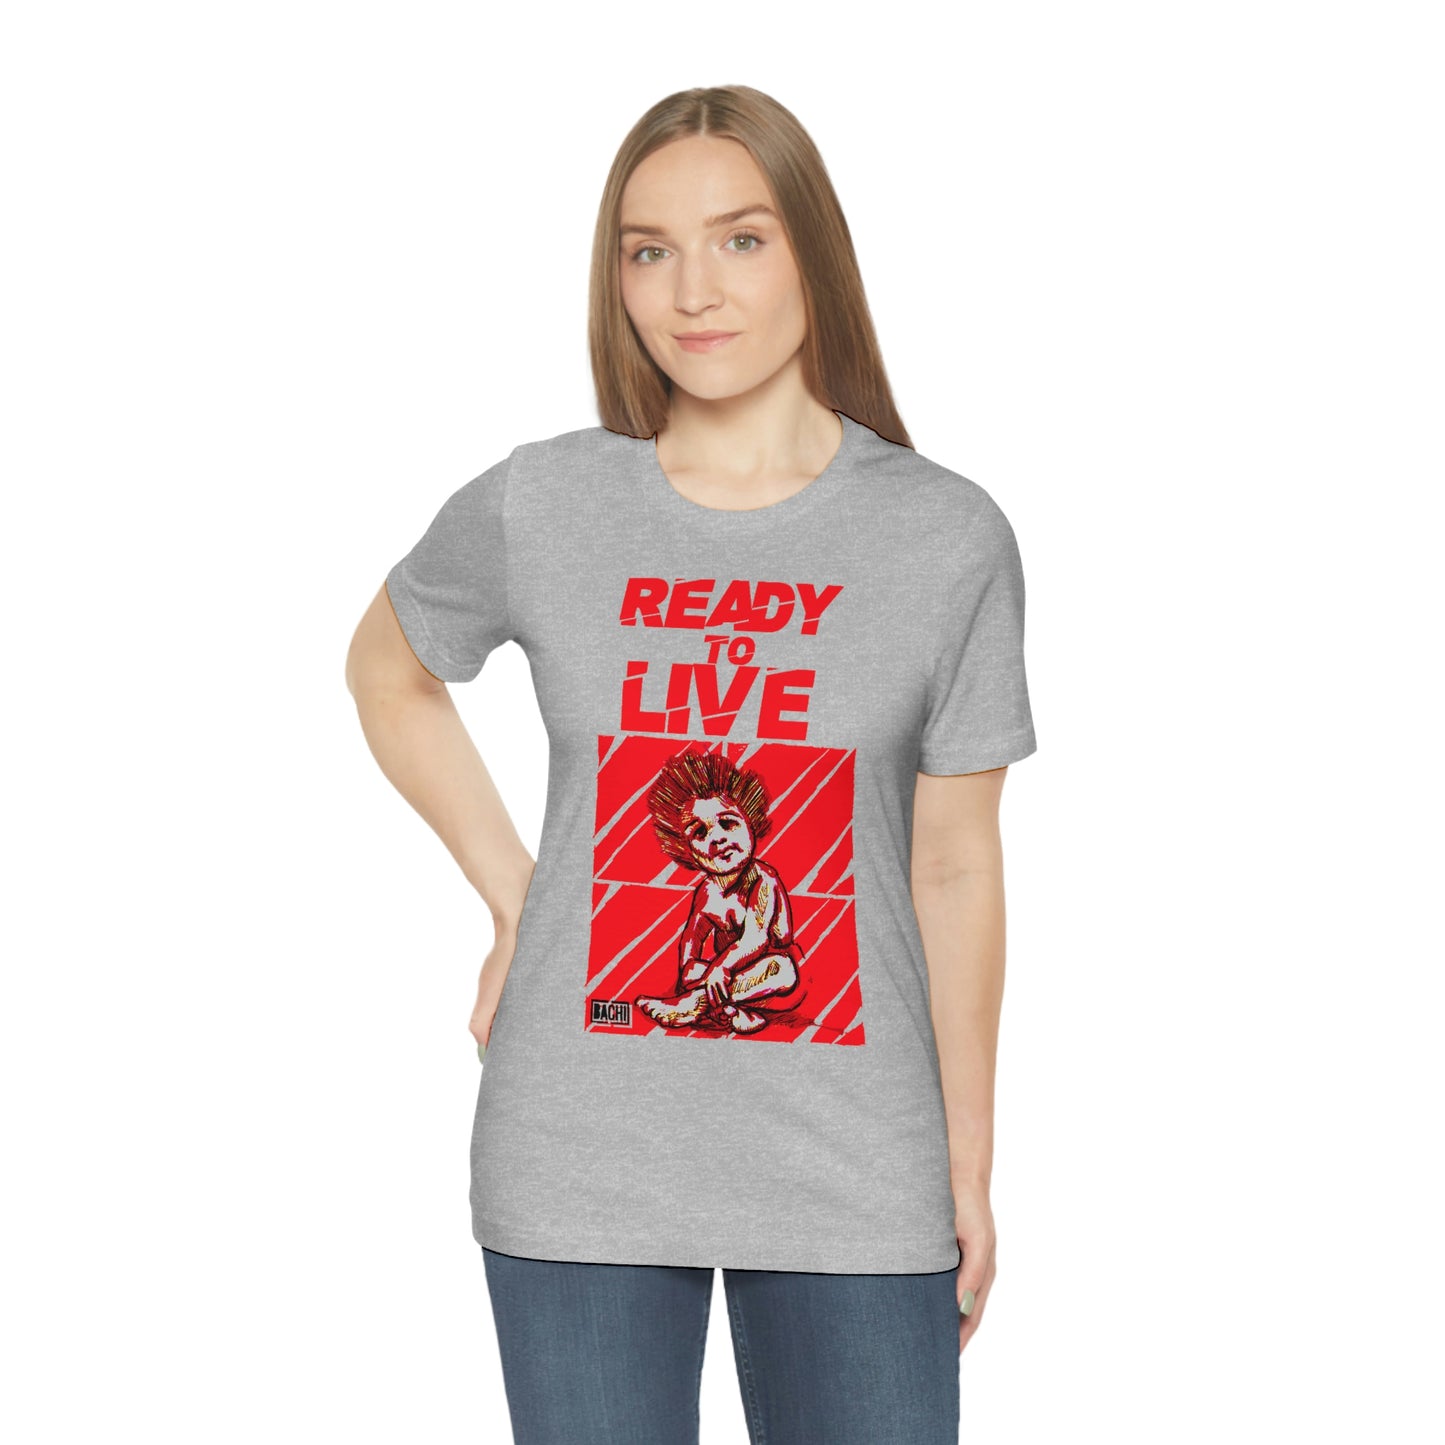 Unisex T-shirt Ready To Live Say No To Drugs